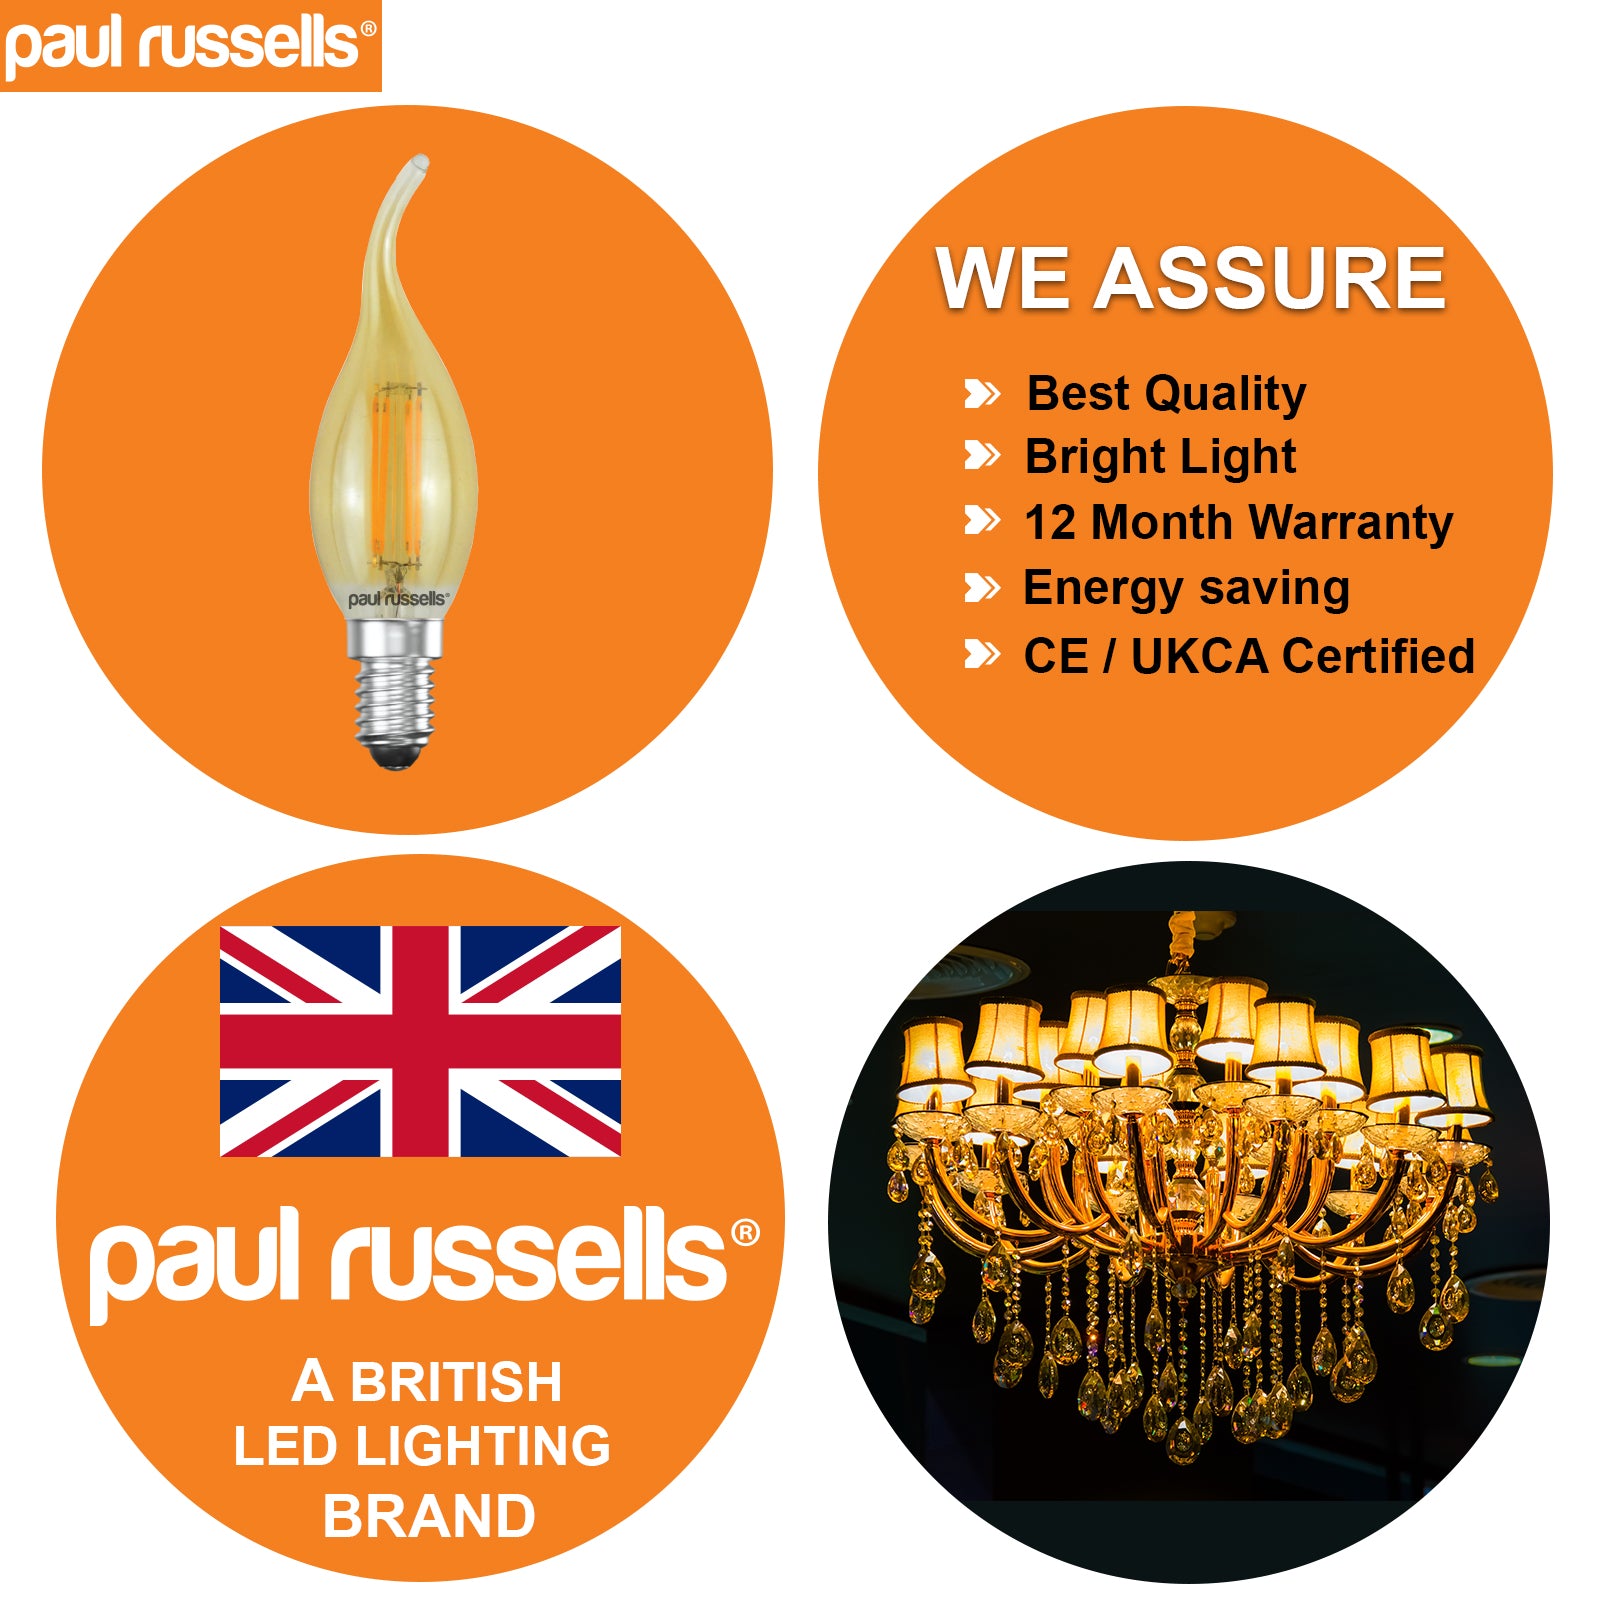 LED Filament Bent Tip Candle 4.5W=35W Extra Warm White (Amber) SES E14 Small Edison Screw Bulbs